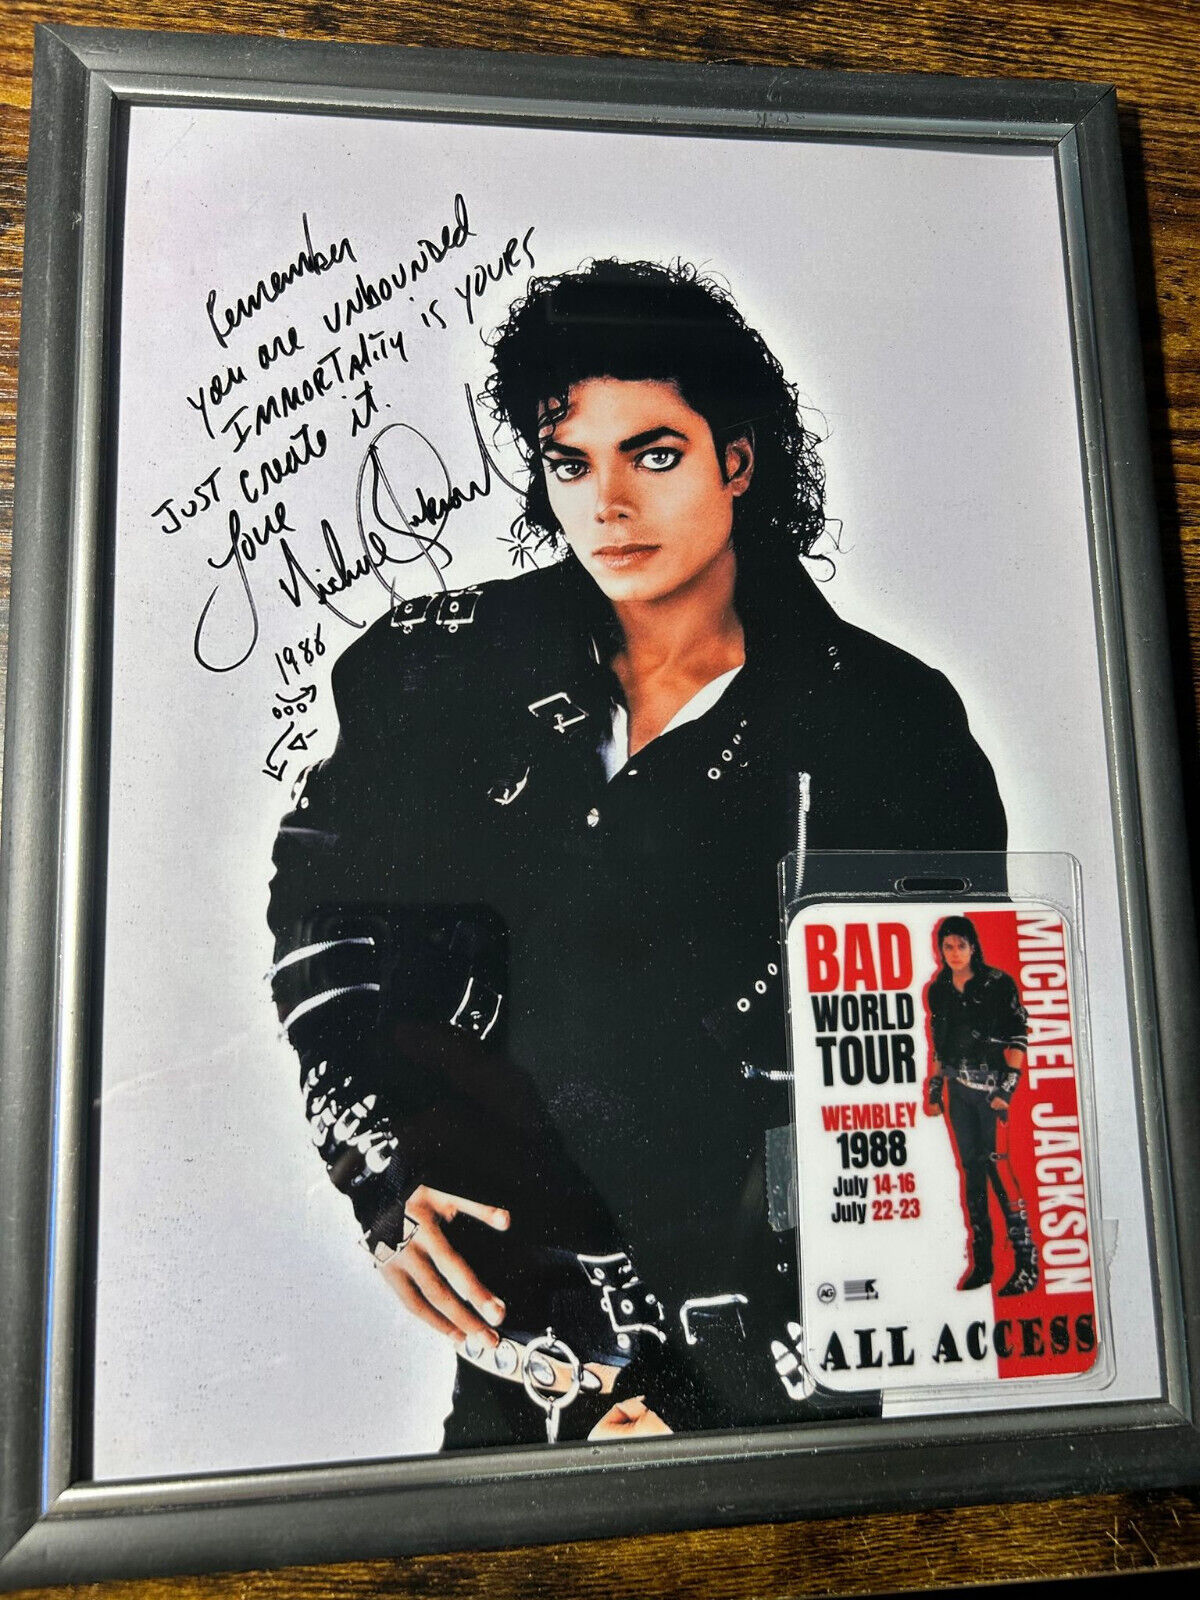 Michael Jackson 1988 signed Framed Reprint photo And All Access Laminate Pass